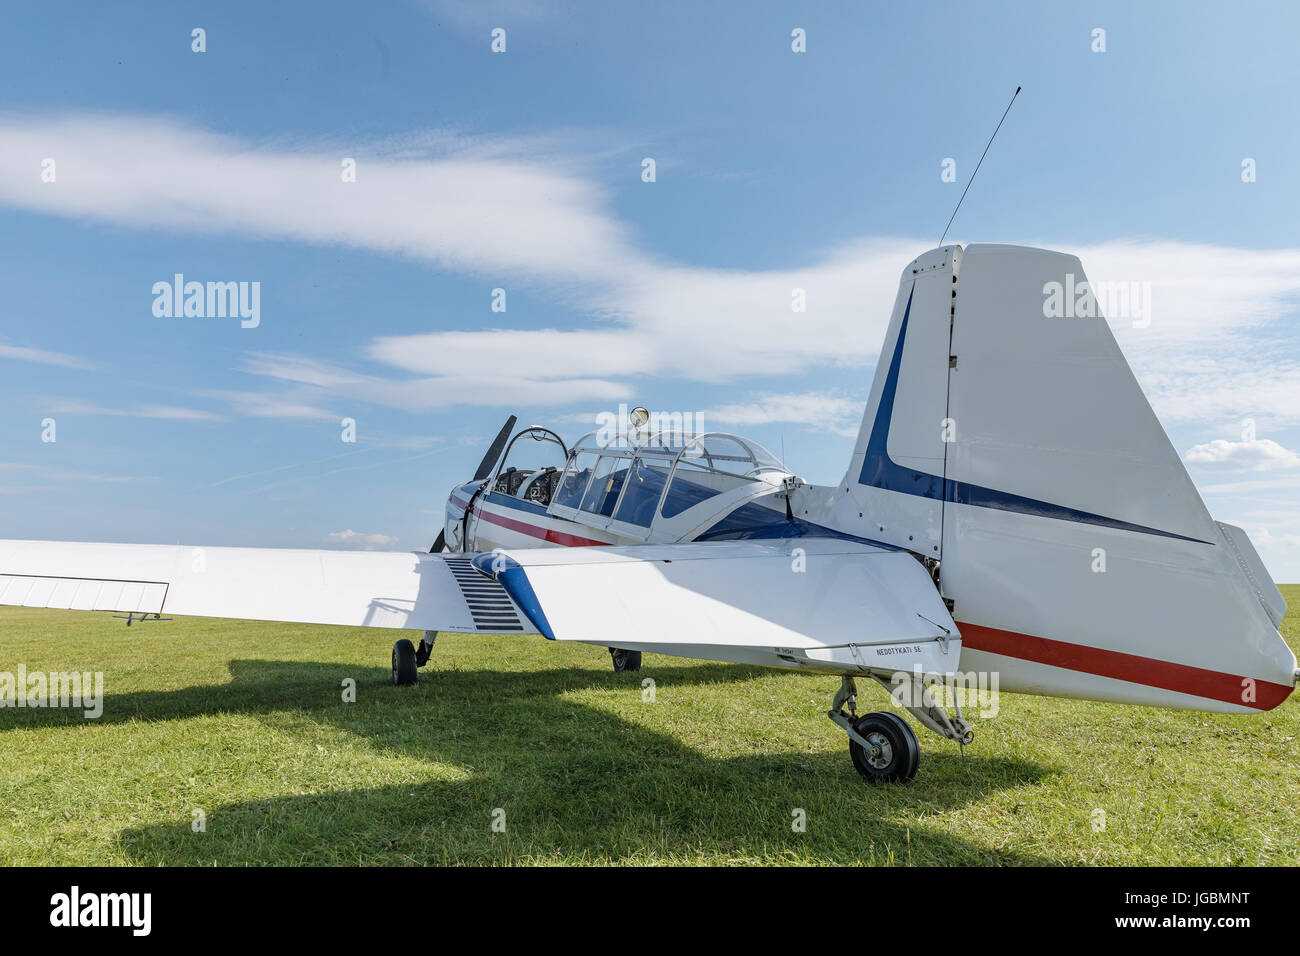 Two seat single engine civil utility aircraft, white small plane, red and blue strip is towed by a glider on a sunny day. Stock Photo